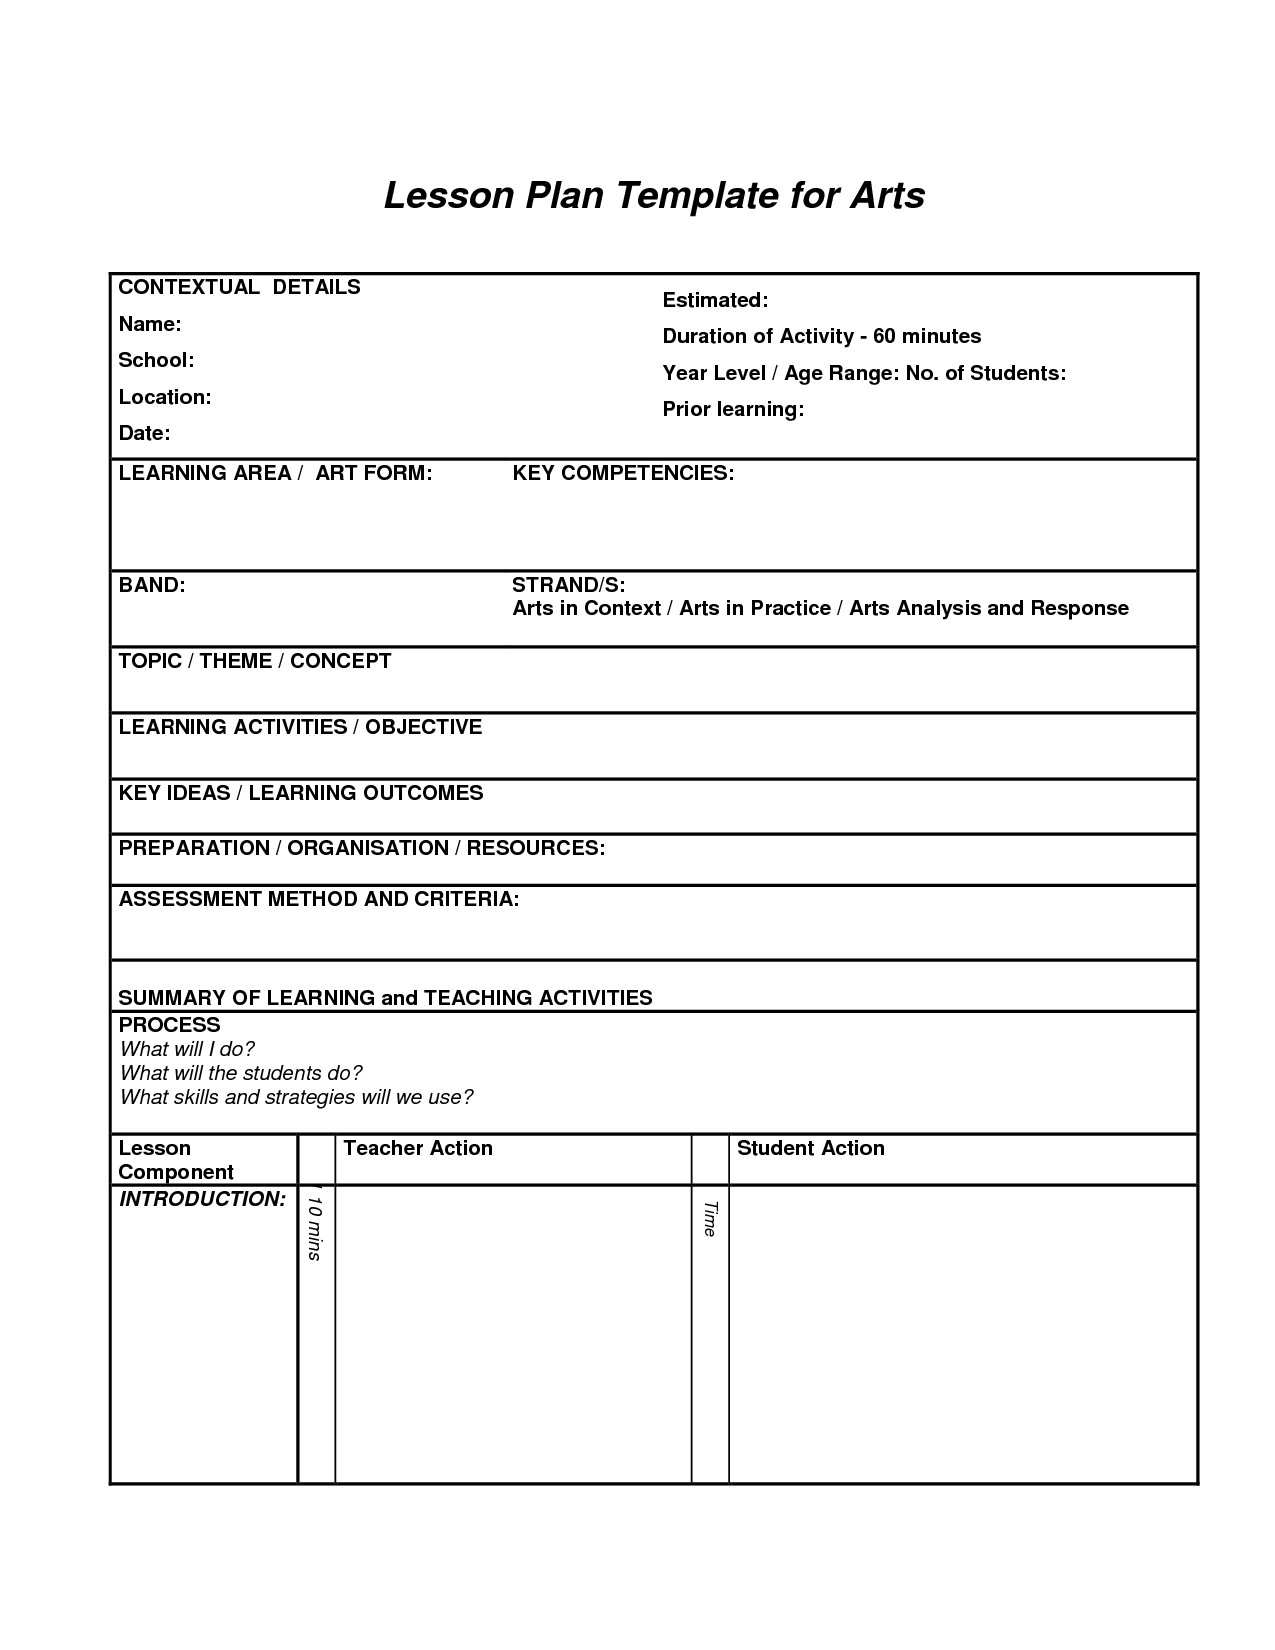 Lesson Plan Template For Arts | ART EDUCATION ESSENTIALS 